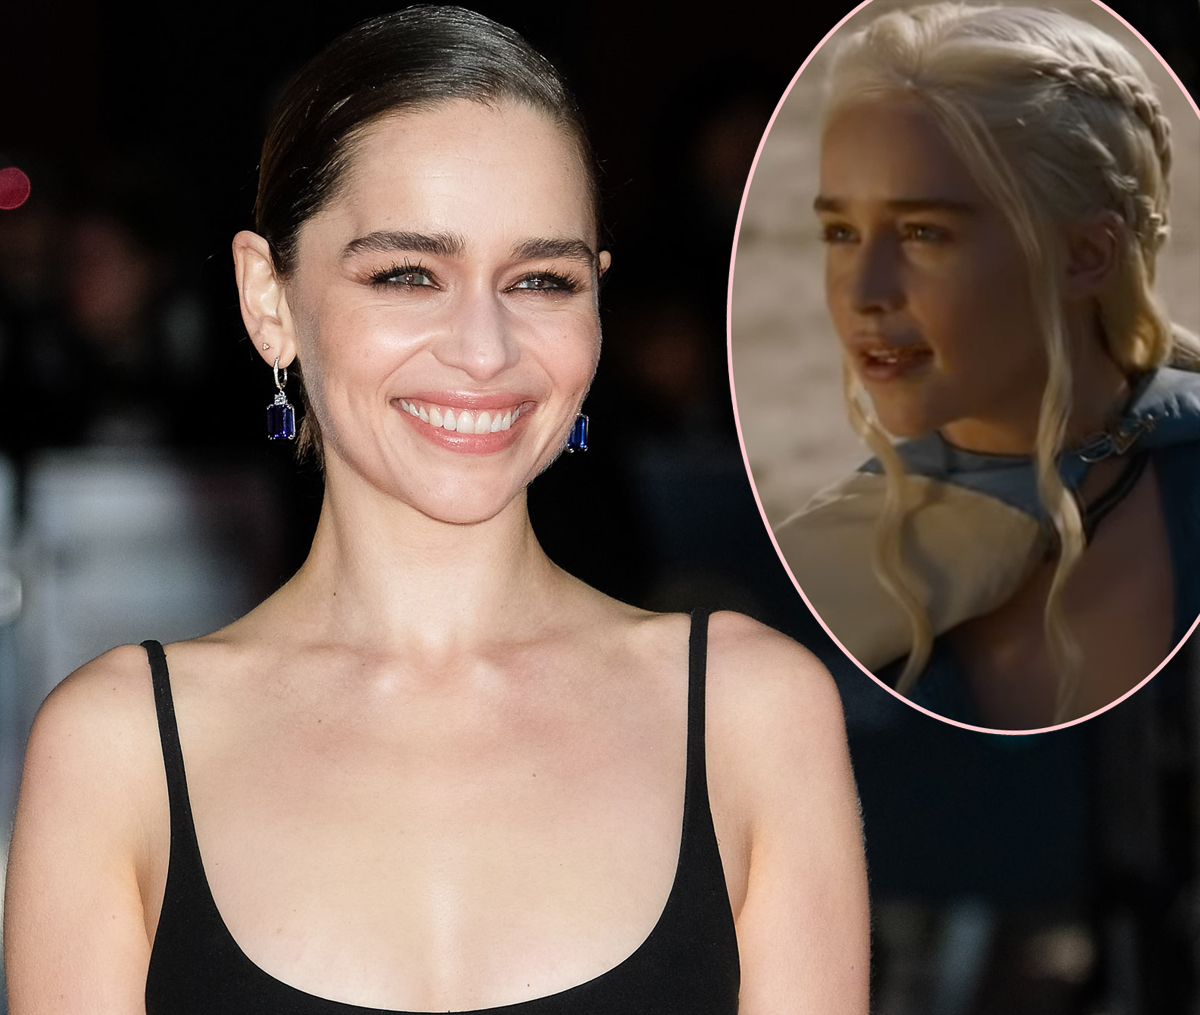 #Game Of Thrones Star Emilia Clarke Says ‘Quite A Bit’ Of Her Brain Is ‘Missing’ After Life-Threatening Aneurysms